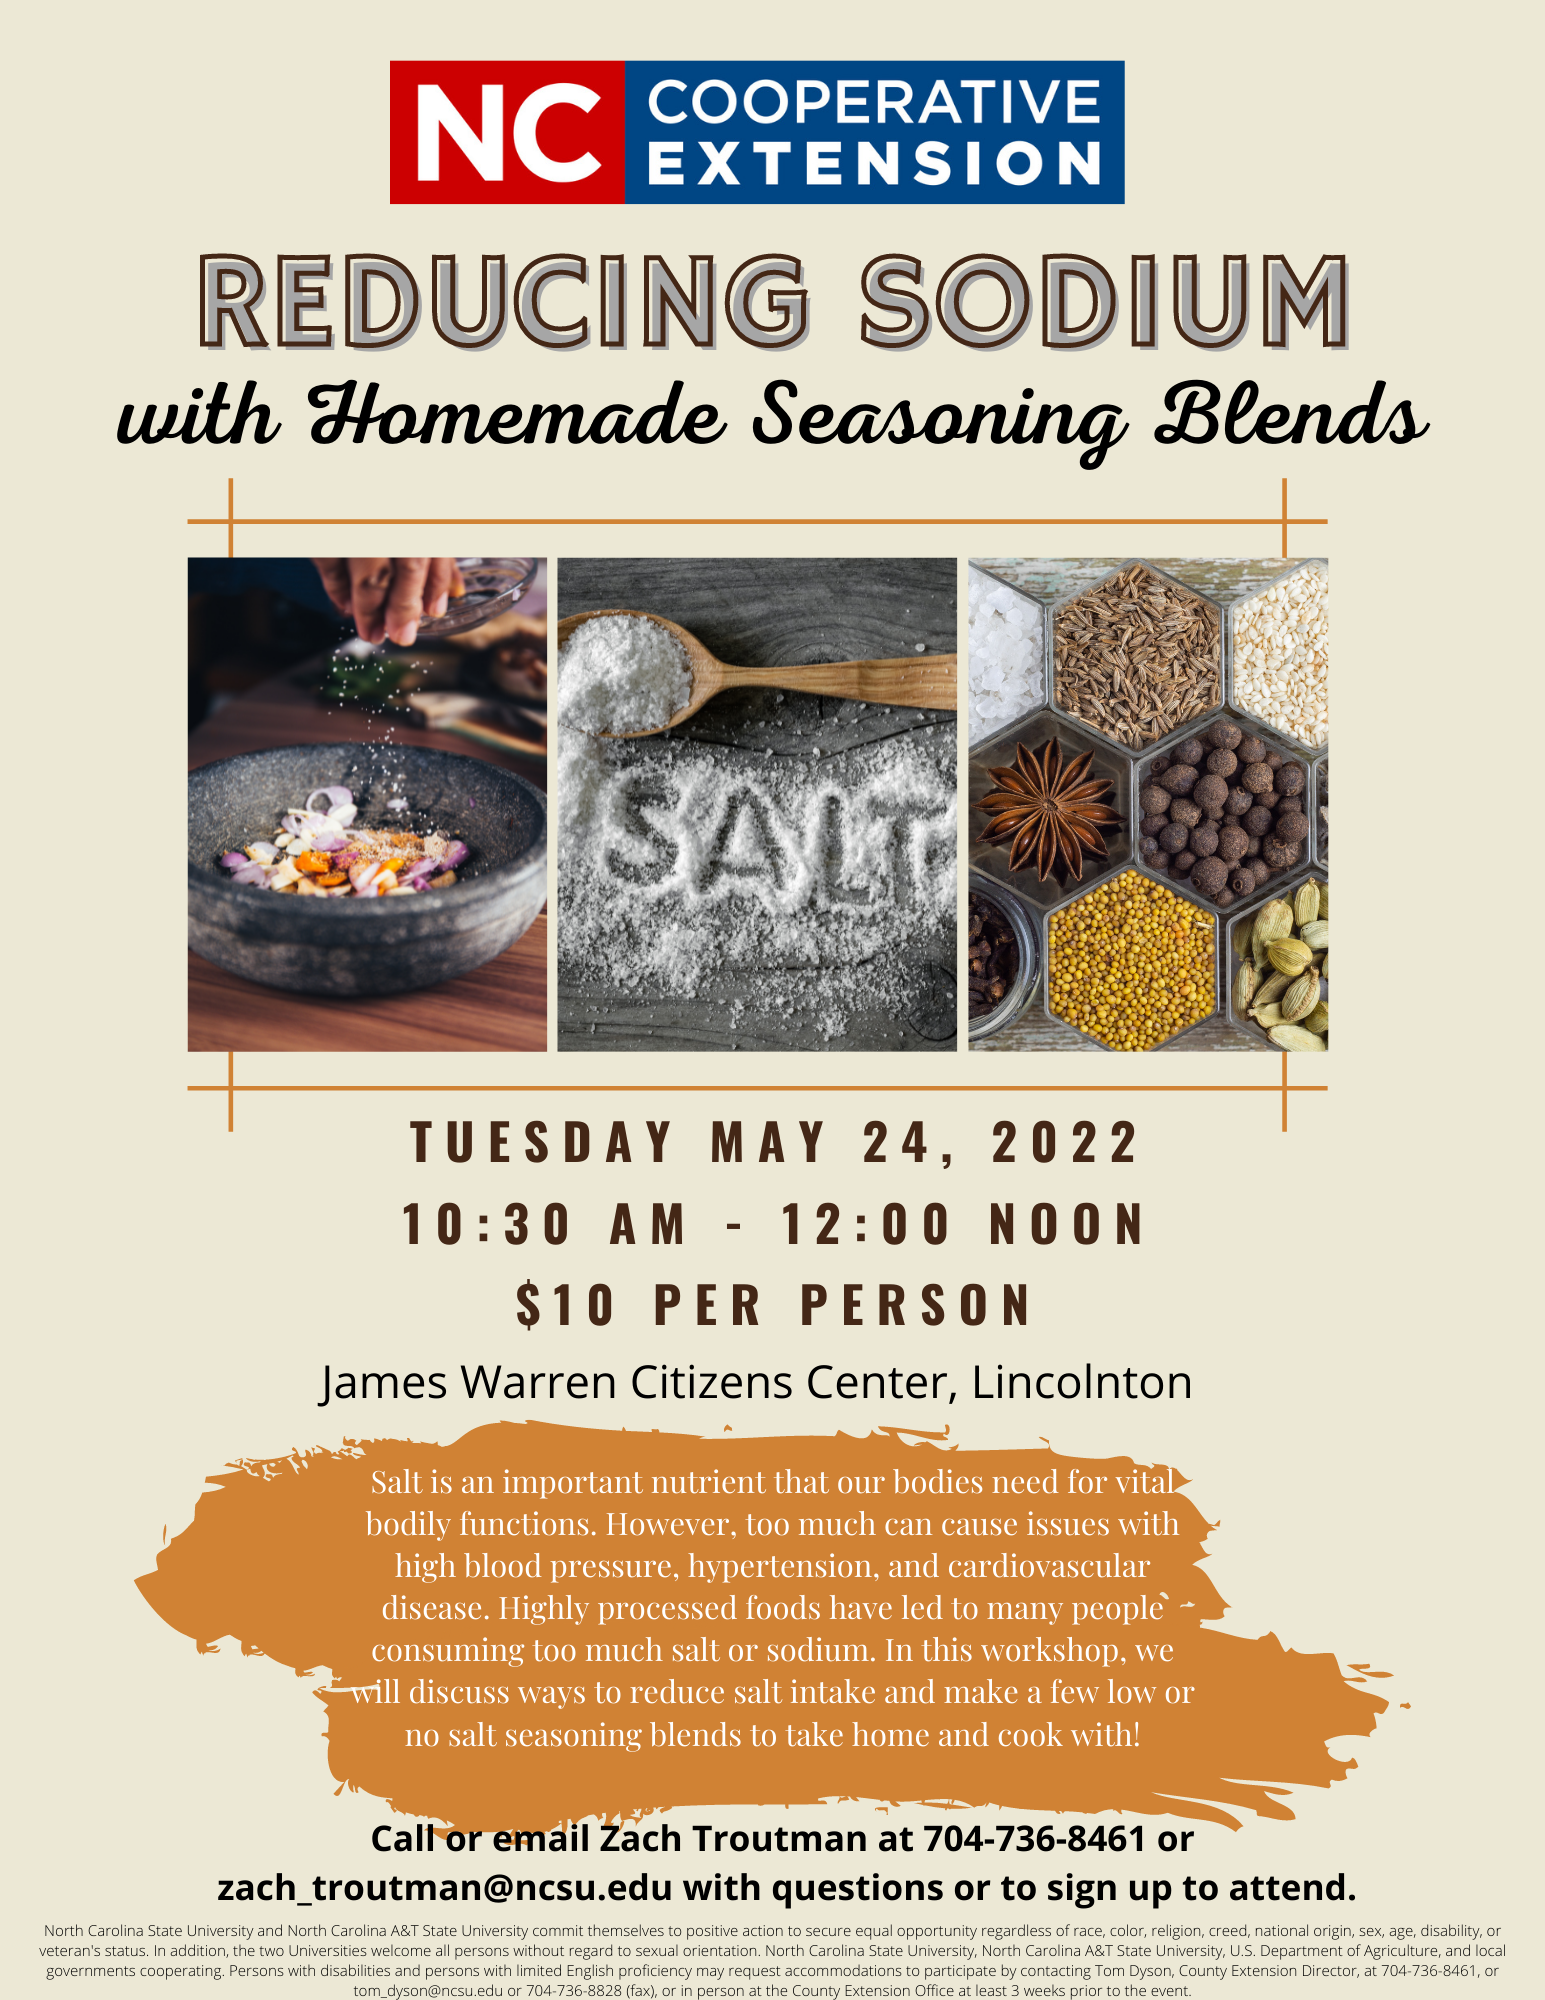 A flyer for reducing sodium with homemade seasoning blends. Tuesday May 24, 2022 10:30 a.m. - 12:00 Noon. $10 per person. 